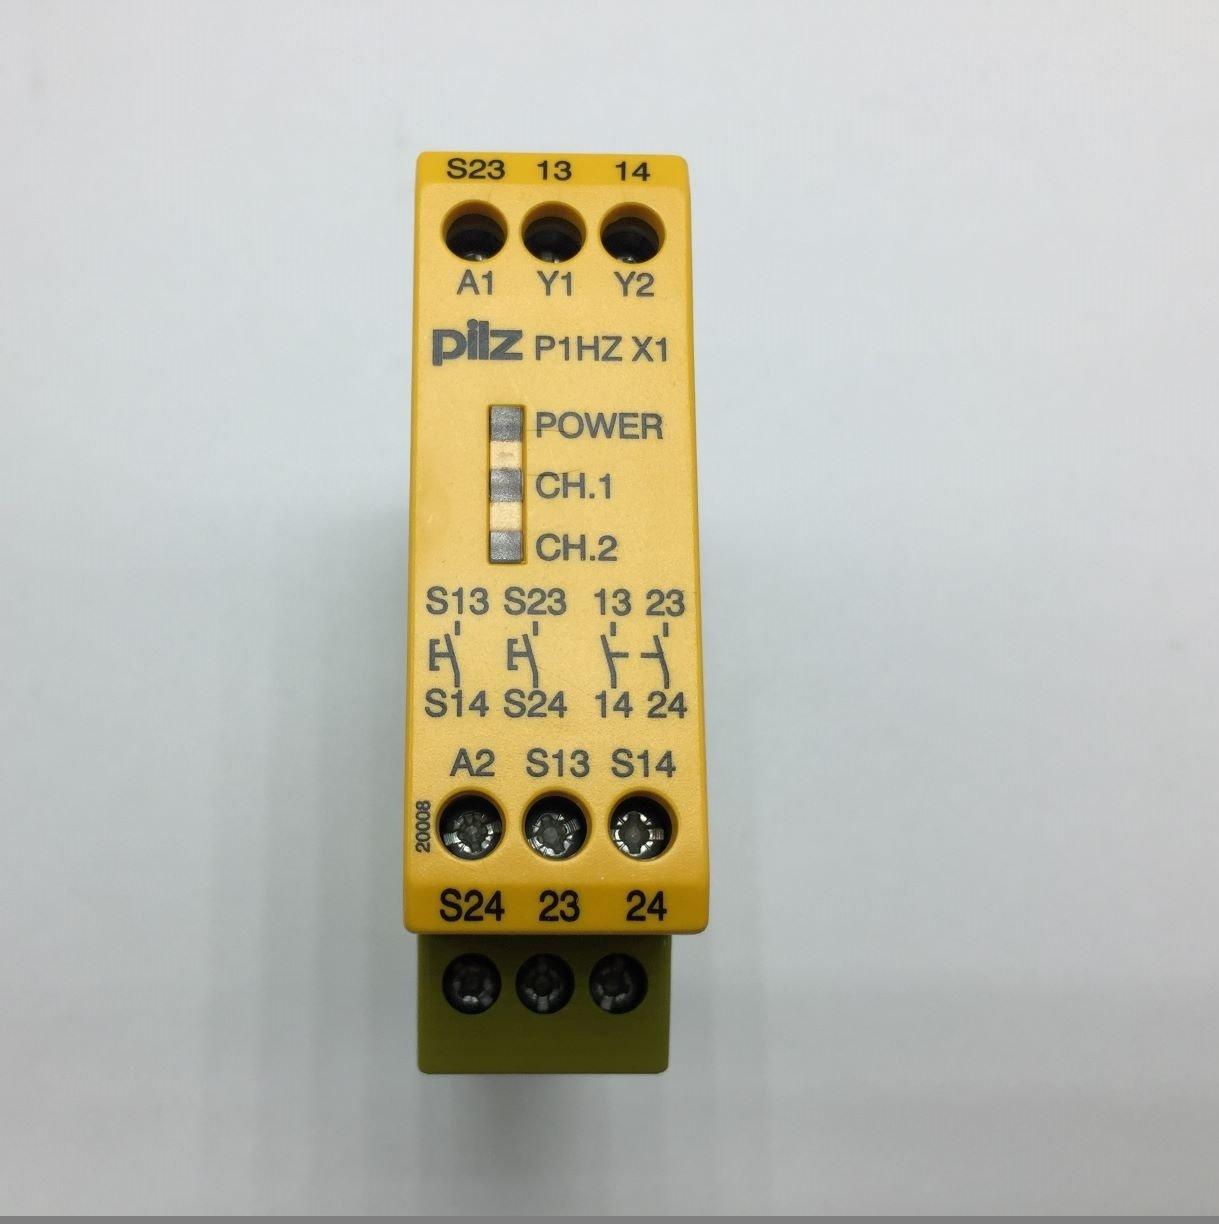 NEW  P1HZX124VDC 2N/O SAFETY RELAY 24VDC 2W 